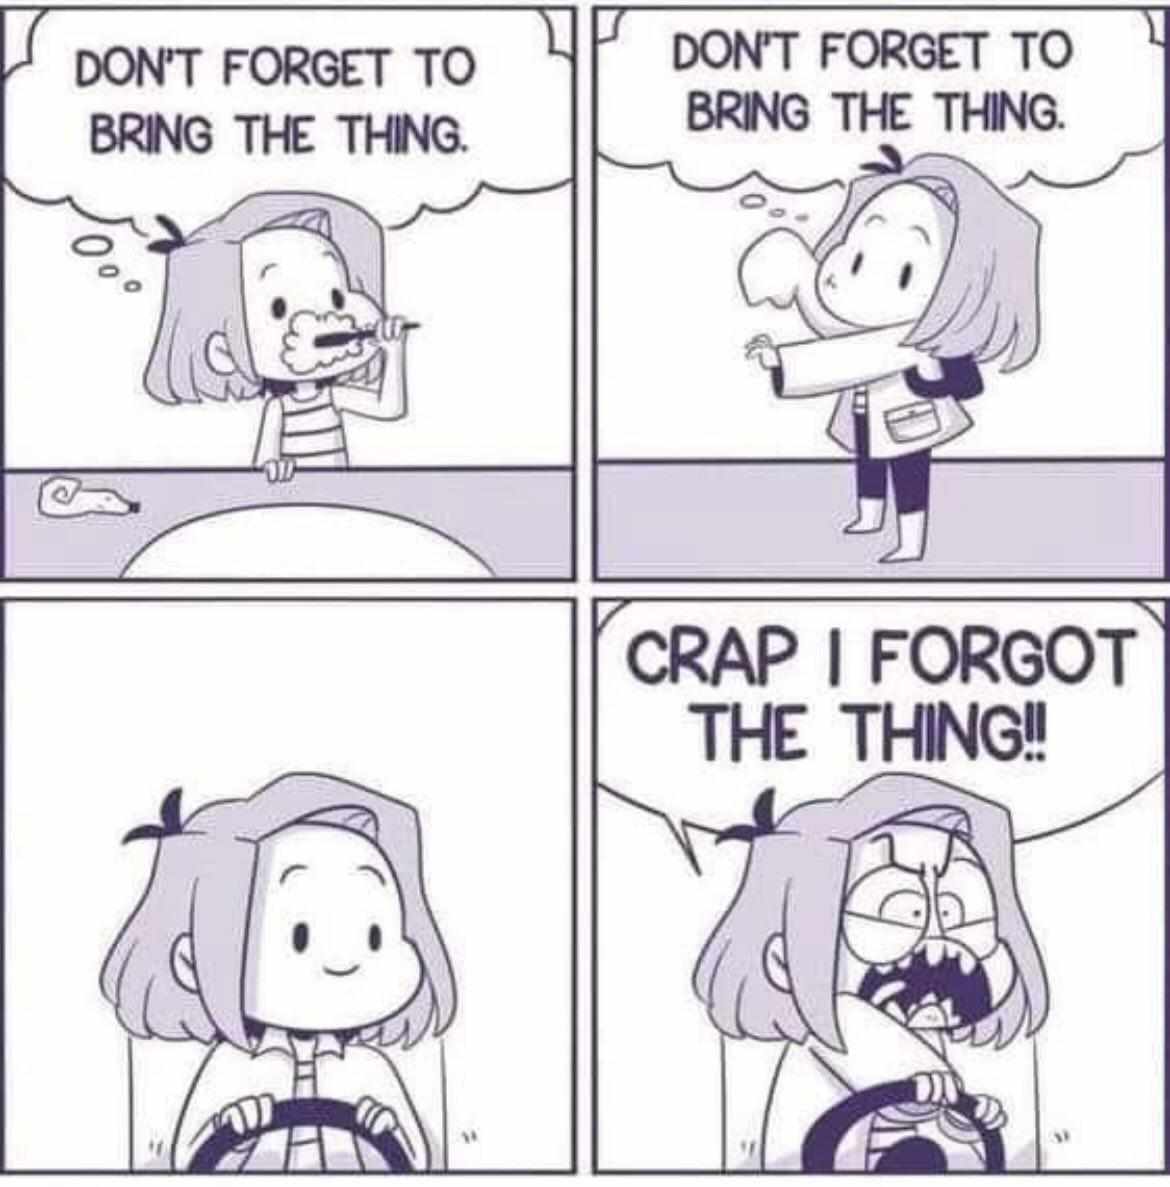 🤦‍♂️ Don't you hate it when you forget the thing you absolutely needed? 🤷‍♀️ #ForgetfulMoments #Oops #DontForgetTheThing #bobandbrad #dailymeme